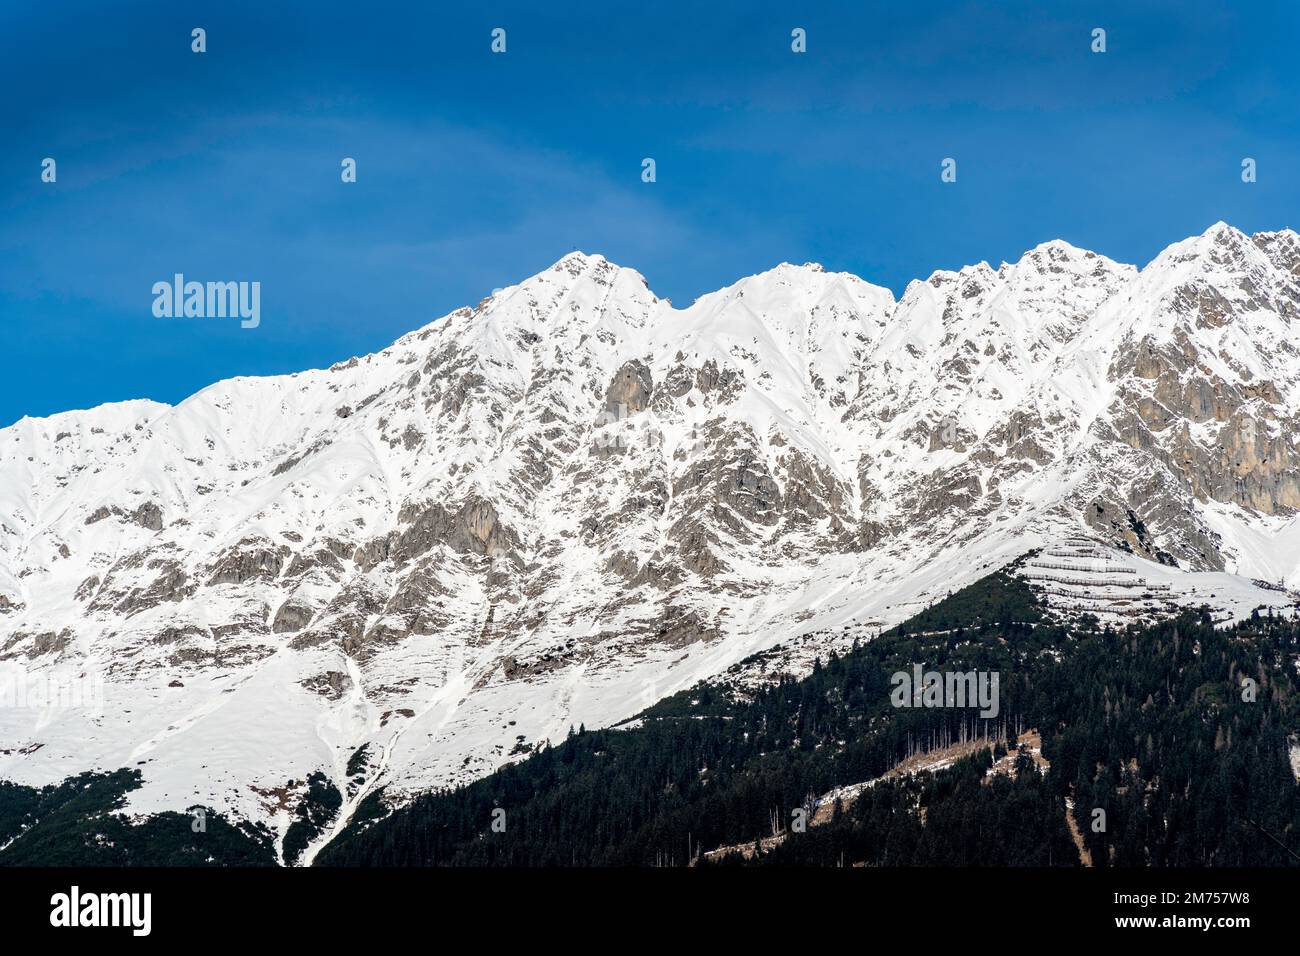 Landscape of snow capped mountains and ski resort in the Austrian Alps, winter Europe Stock Photo